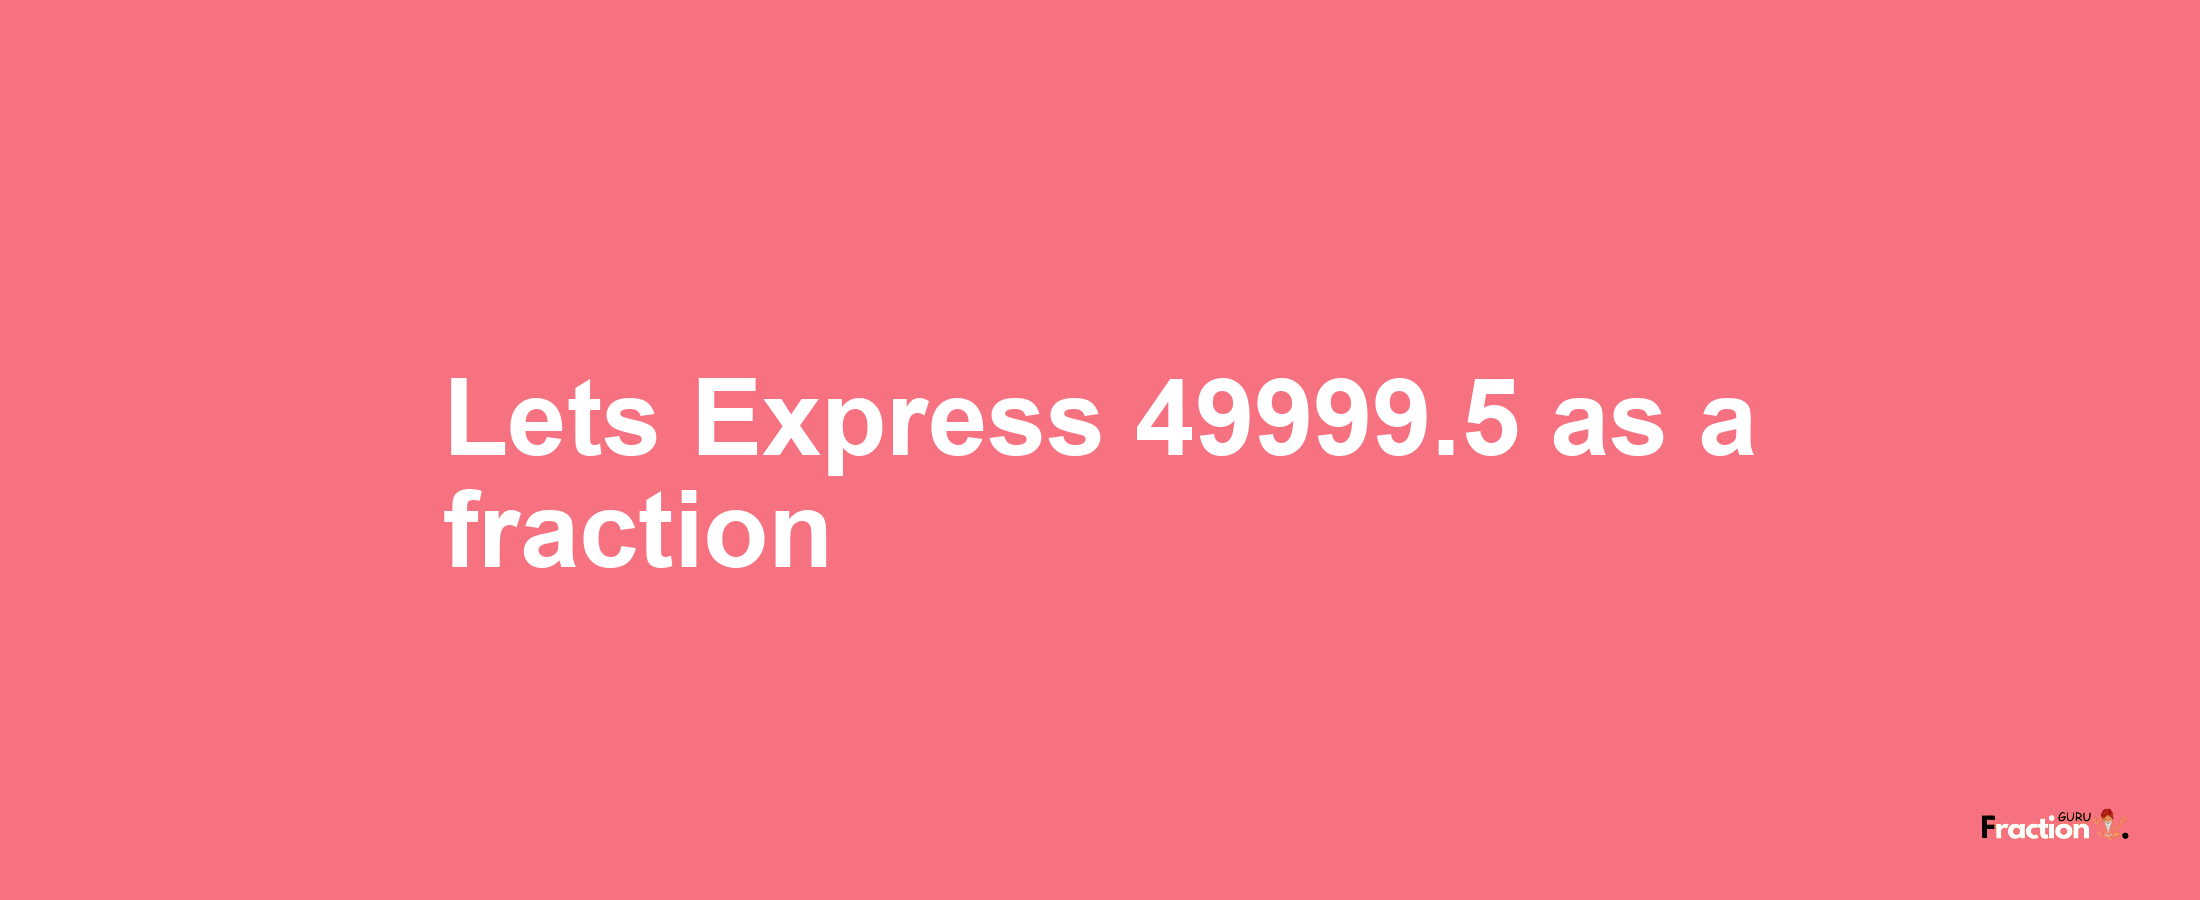 Lets Express 49999.5 as afraction